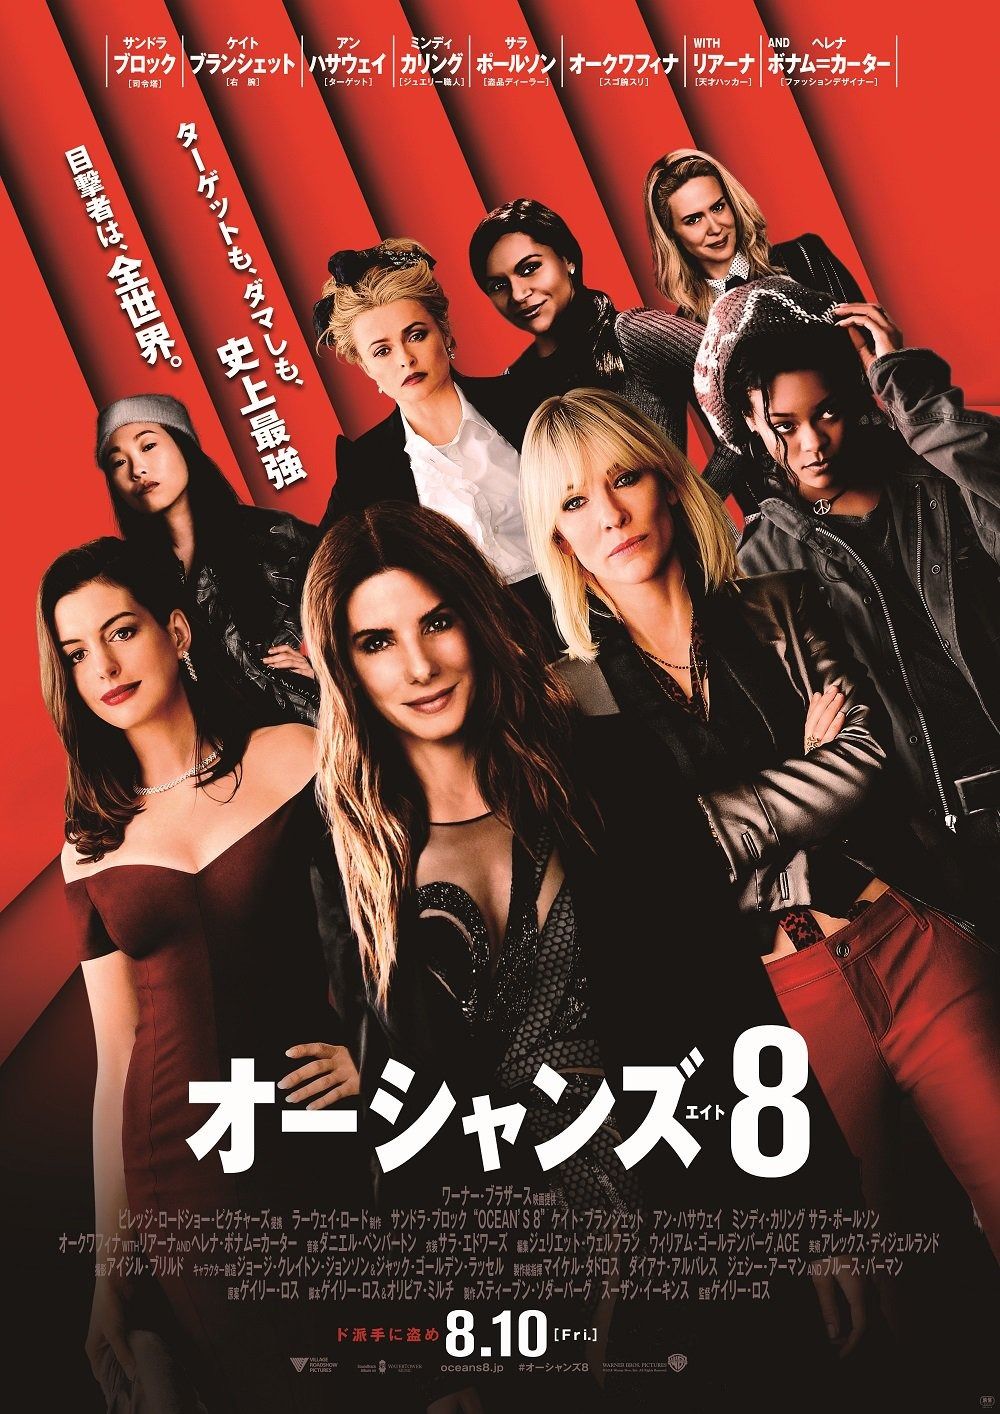 Ocean's 8 Poster From Japan /clips Of Oceans 8/ #Oceans8 #Oceans8Movie #Japan. Ocean 8 Movie, Movie Posters, Oceans 8